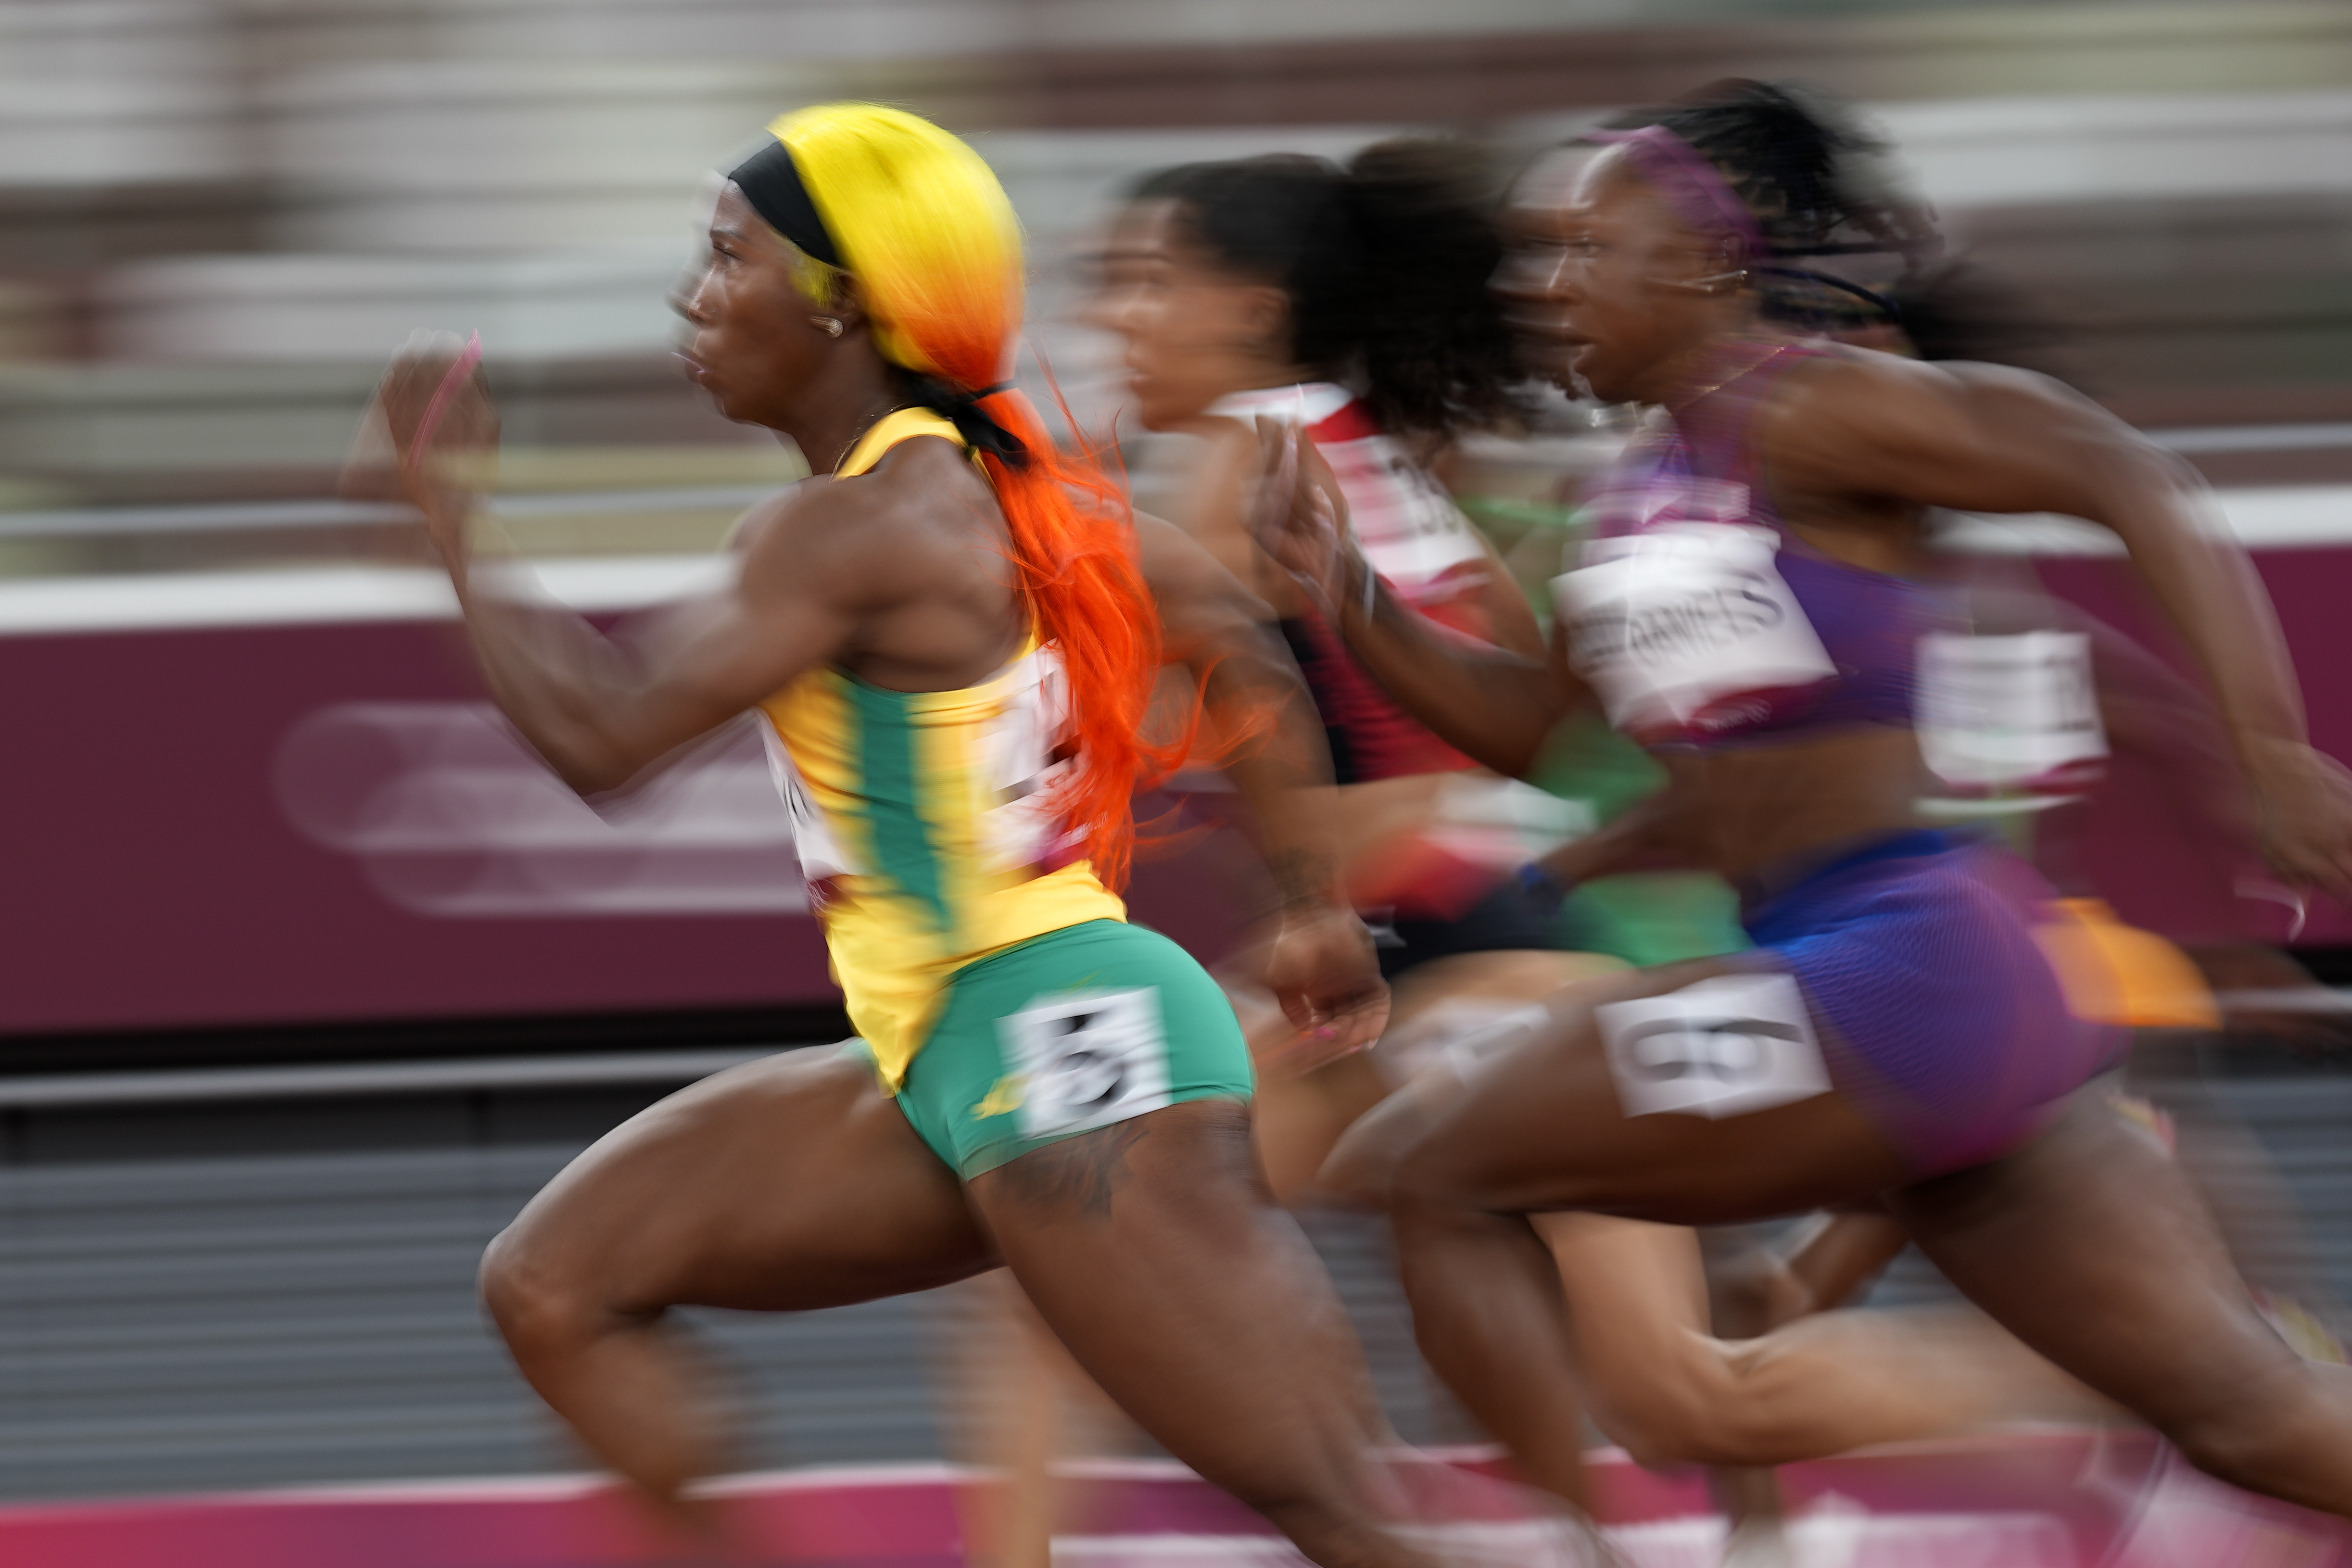 Olympic Track And Field 21 Women S 100m Medal Winners Times And Results Bleacher Report Latest News Videos And Highlights